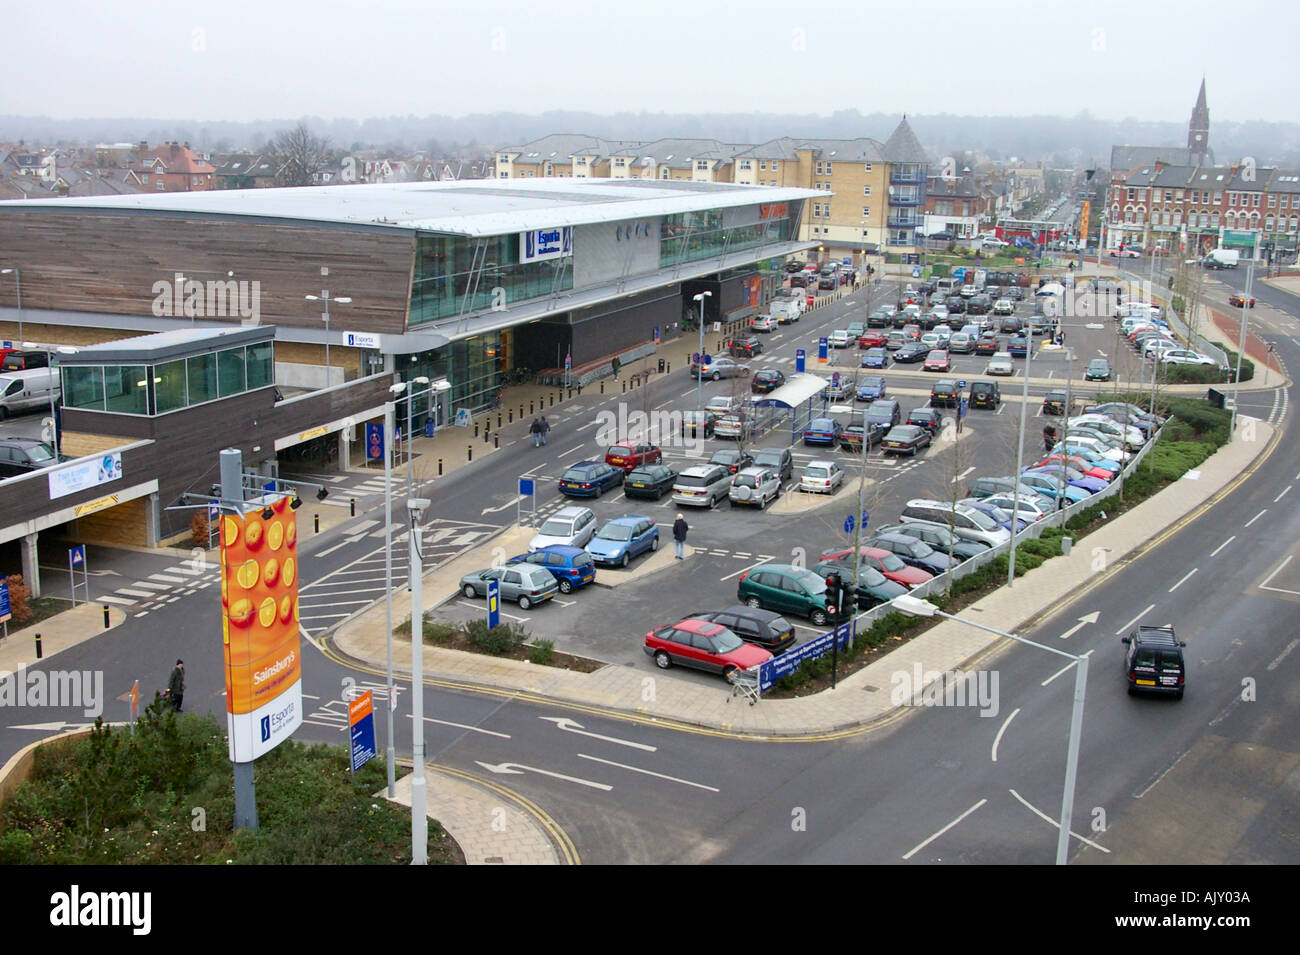 Sainsbury store and car park in Kingston Surrey Stock Photo - Alamy